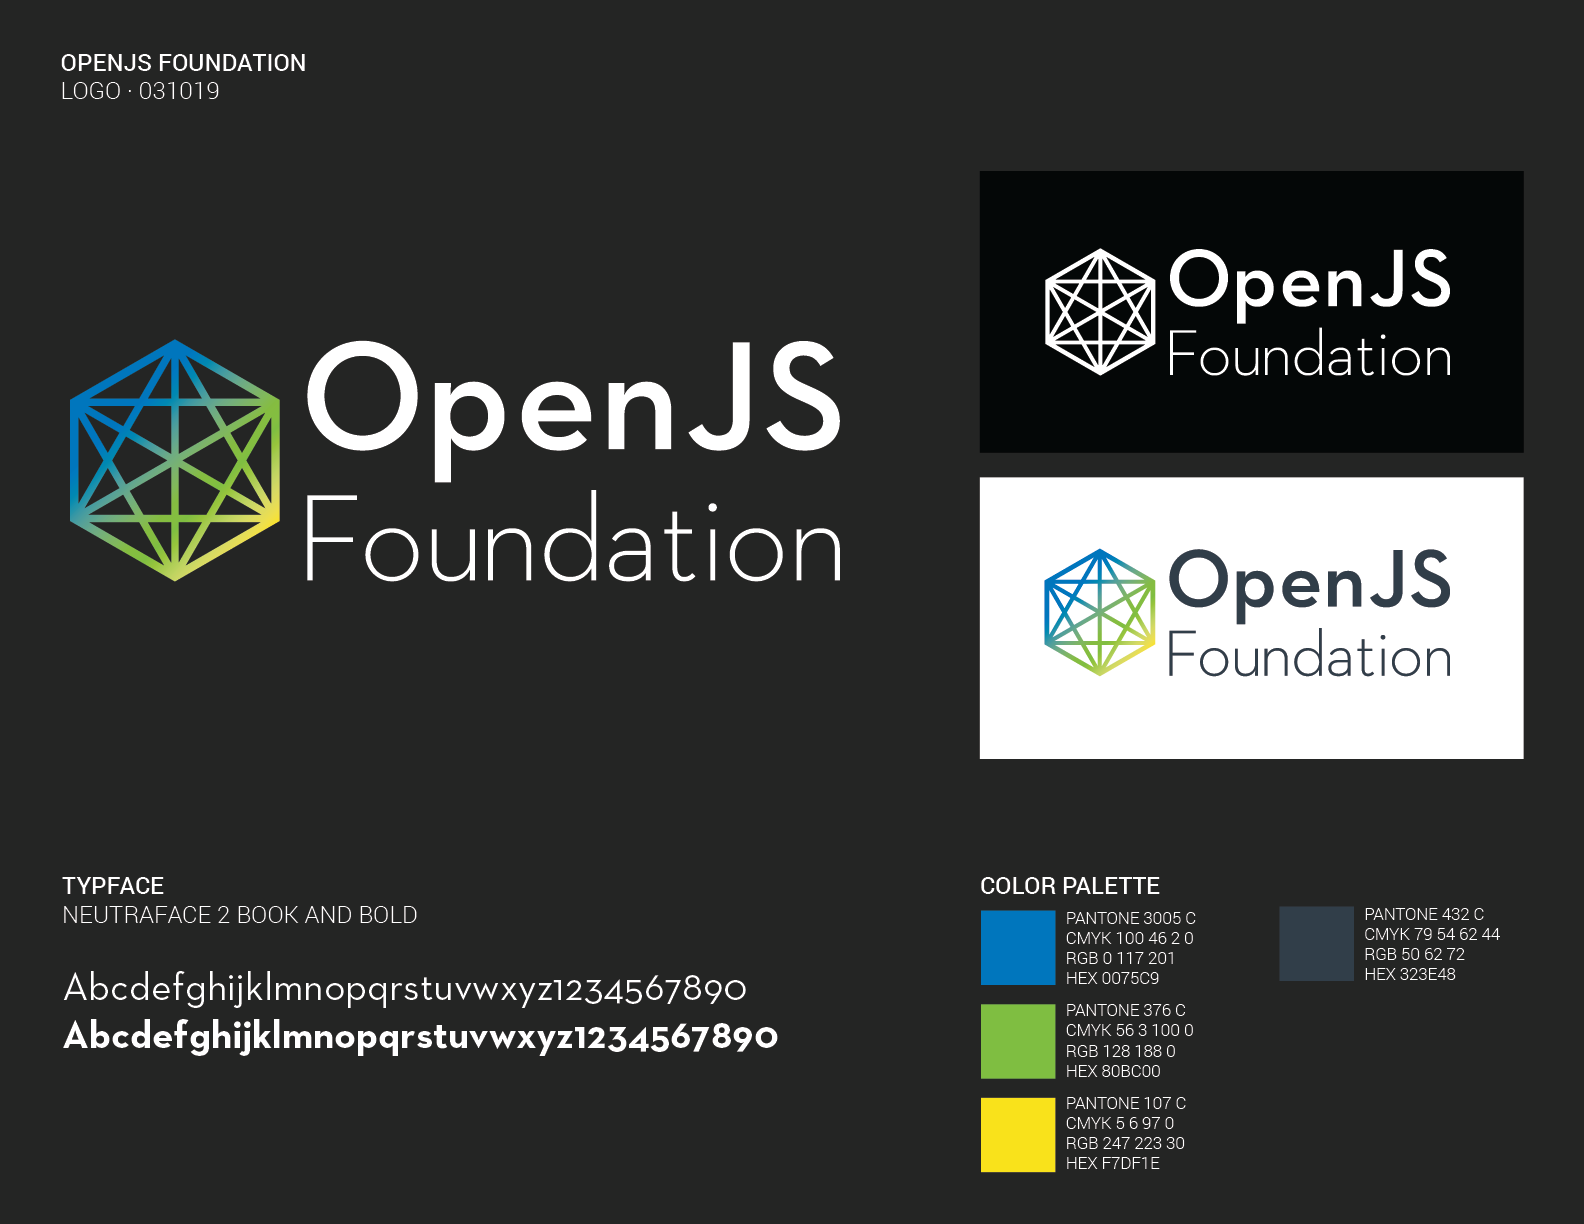 openjs_foundation-brand_guide.png